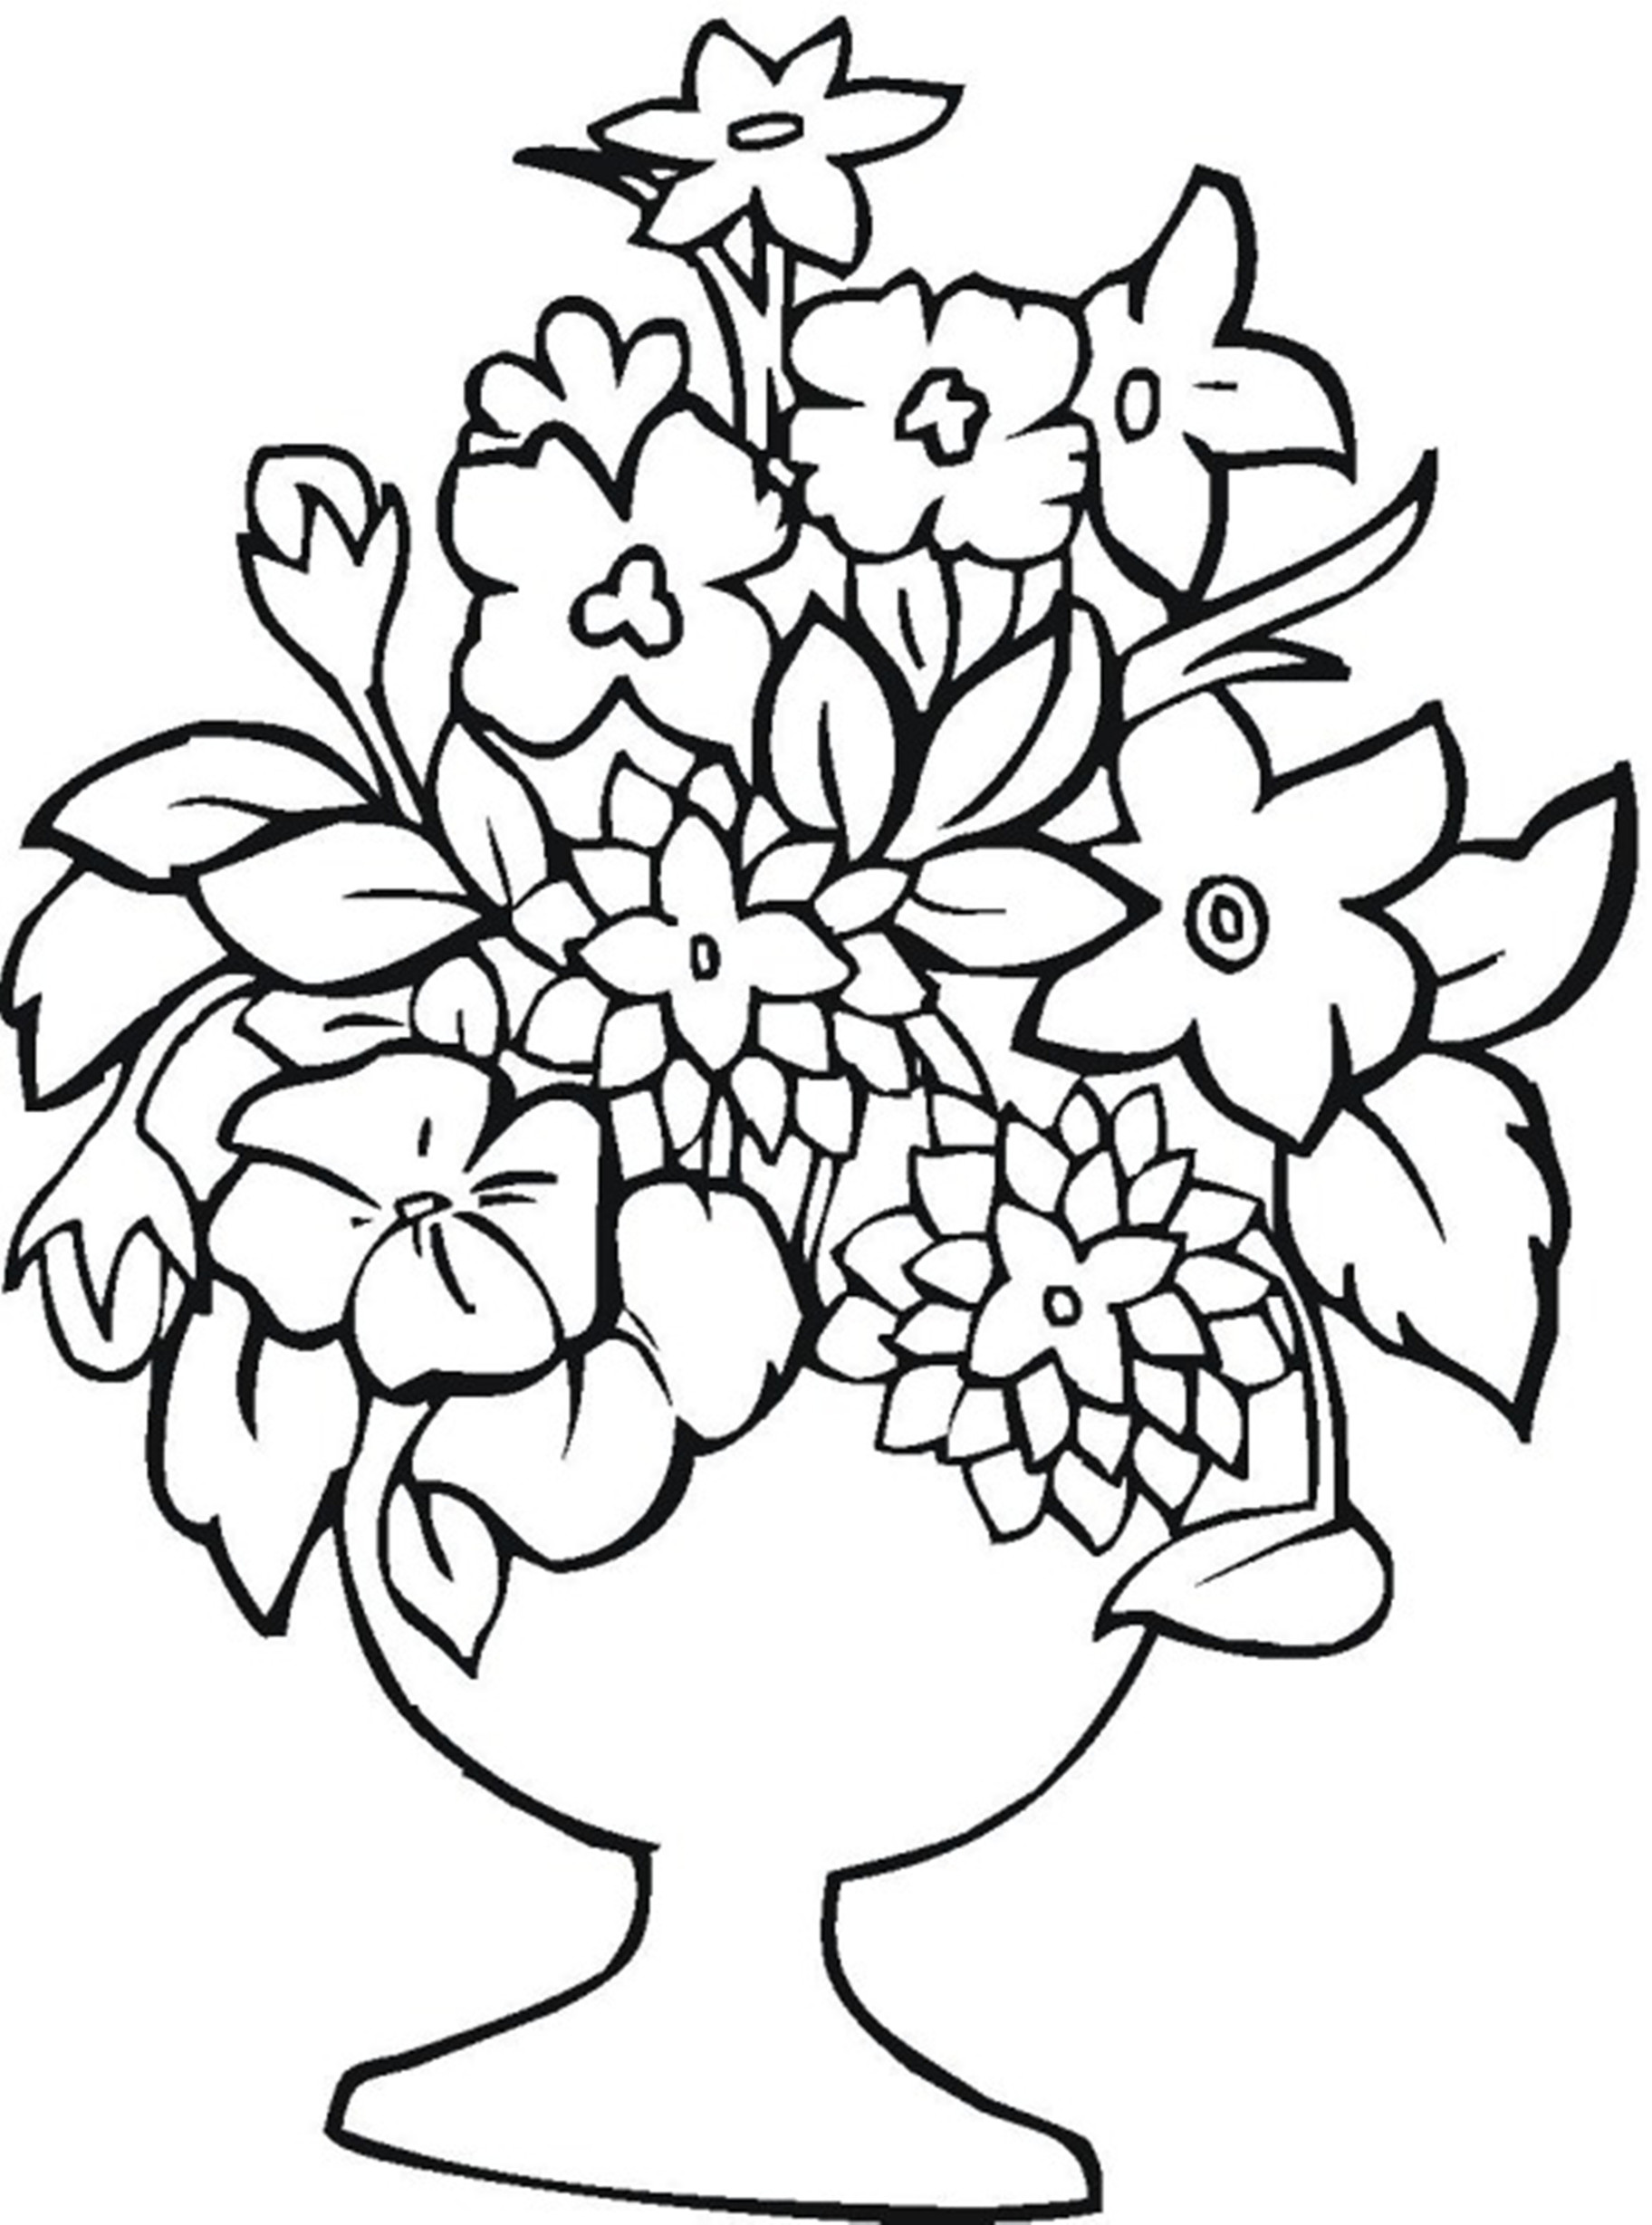 Free Printable Flower Coloring Pages
 Flowers Coloring Pages Kidsuki